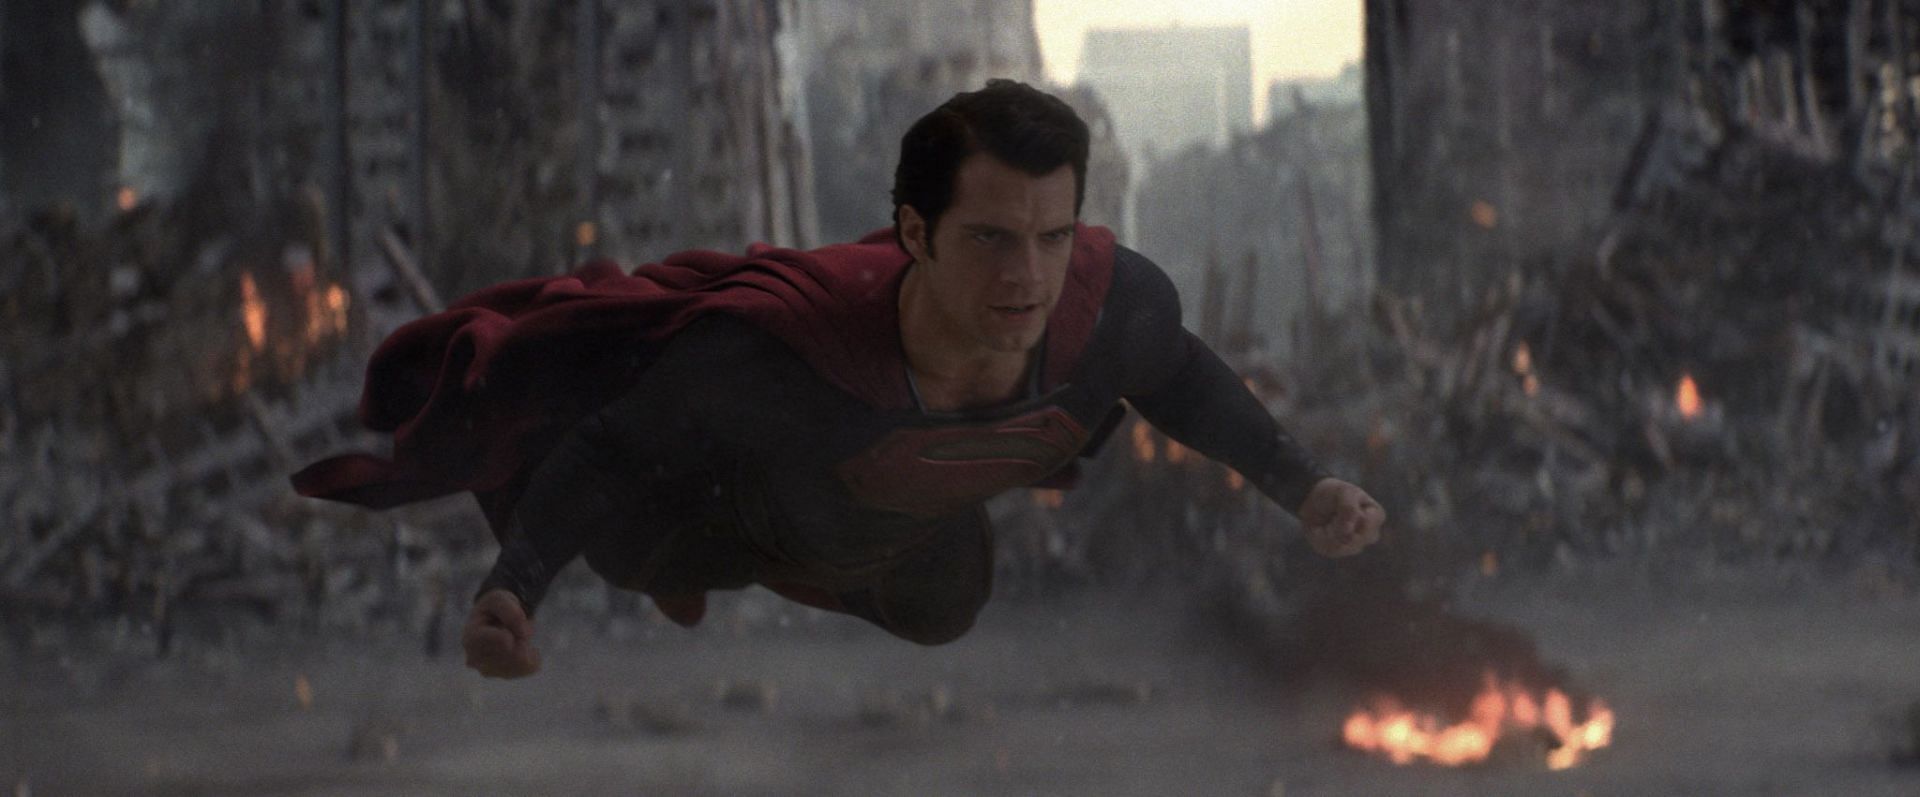 The Man of Steel - Possessing incredible strength and nearly invulnerable, Superman is the epitome of an overpowered superhero (Image via Warner Bros)